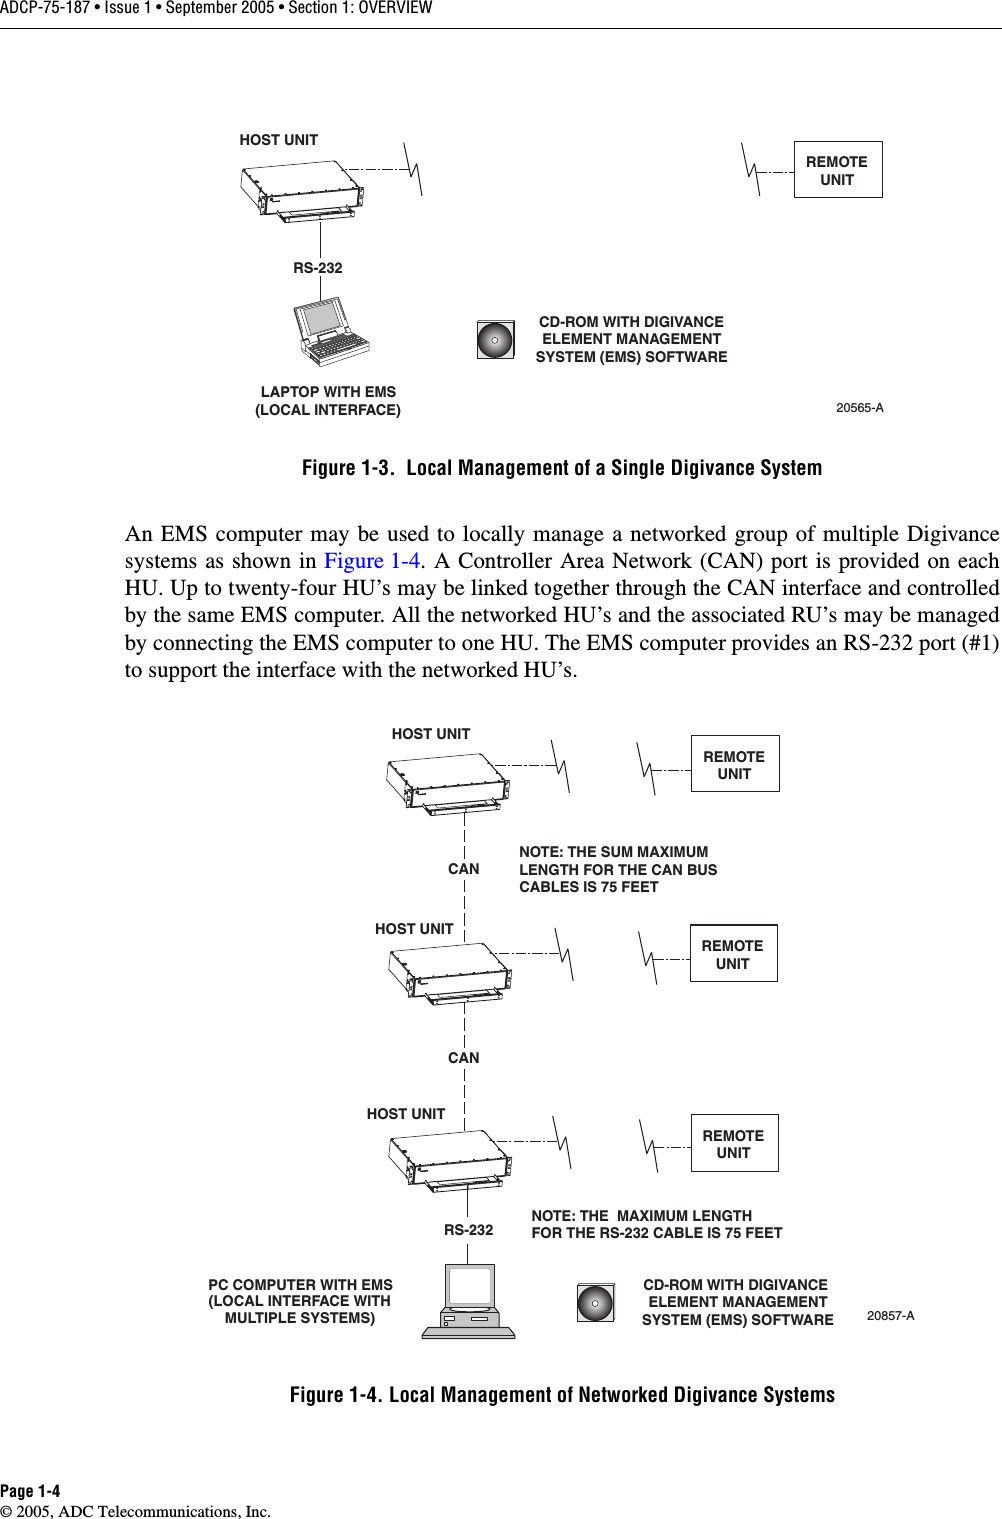 ADCP-75-187 • Issue 1 • September 2005 • Section 1: OVERVIEWPage 1-4© 2005, ADC Telecommunications, Inc.Figure 1-3.  Local Management of a Single Digivance SystemAn EMS computer may be used to locally manage a networked group of multiple Digivancesystems as shown in Figure 1-4. A Controller Area Network (CAN) port is provided on eachHU. Up to twenty-four HU’s may be linked together through the CAN interface and controlledby the same EMS computer. All the networked HU’s and the associated RU’s may be managedby connecting the EMS computer to one HU. The EMS computer provides an RS-232 port (#1)to support the interface with the networked HU’s. Figure 1-4. Local Management of Networked Digivance SystemsHOST UNITLAPTOP WITH EMS(LOCAL INTERFACE)20565-ACD-ROM WITH DIGIVANCEELEMENT MANAGEMENTSYSTEM (EMS) SOFTWAREREMOTEUNITRS-232PC COMPUTER WITH EMS(LOCAL INTERFACE WITHMULTIPLE SYSTEMS)HOST UNITHOST UNITHOST UNITRS-23220857-ACD-ROM WITH DIGIVANCE ELEMENT MANAGEMENTSYSTEM (EMS) SOFTWARECANCANREMOTEUNITREMOTEUNITREMOTEUNITNOTE: THE  MAXIMUM LENGTHFOR THE RS-232 CABLE IS 75 FEETNOTE: THE SUM MAXIMUMLENGTH FOR THE CAN BUSCABLES IS 75 FEET